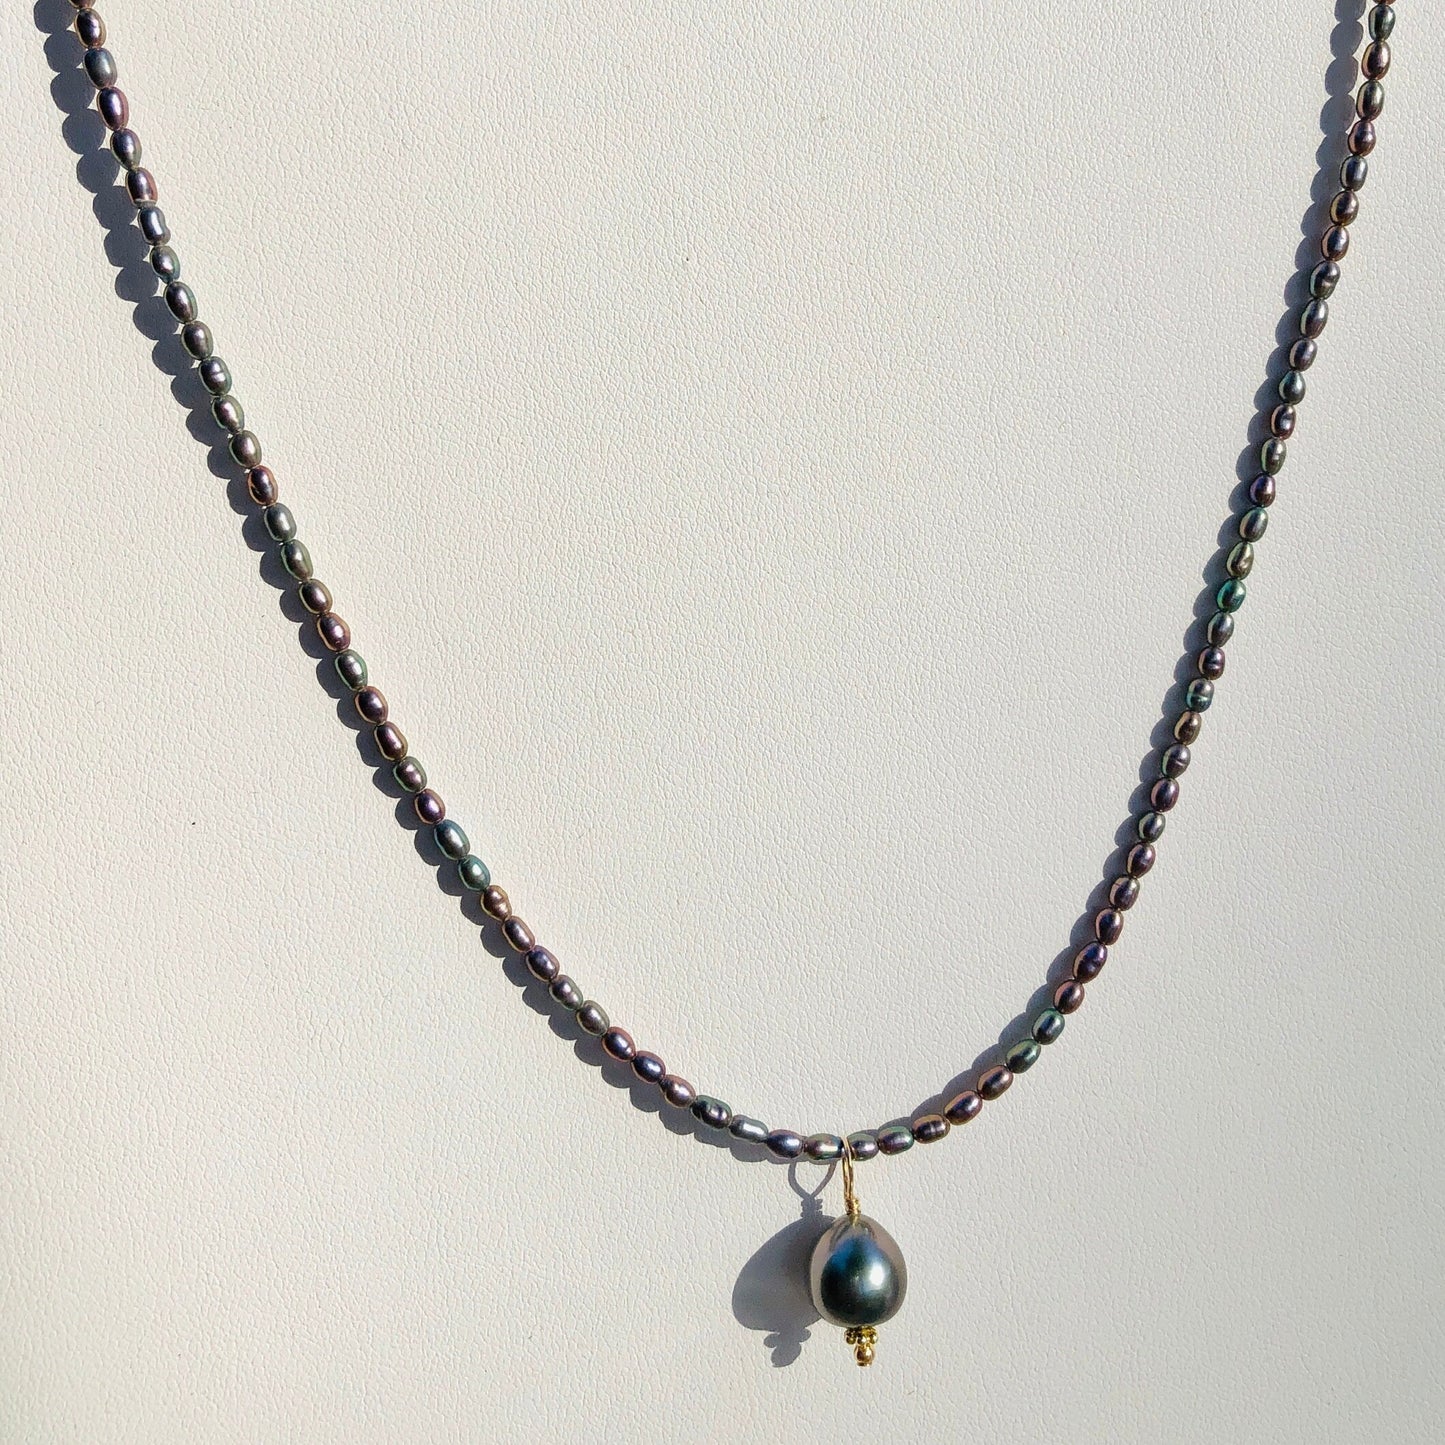 Tahitian Pearl Necklace, Rice Pearl Necklace